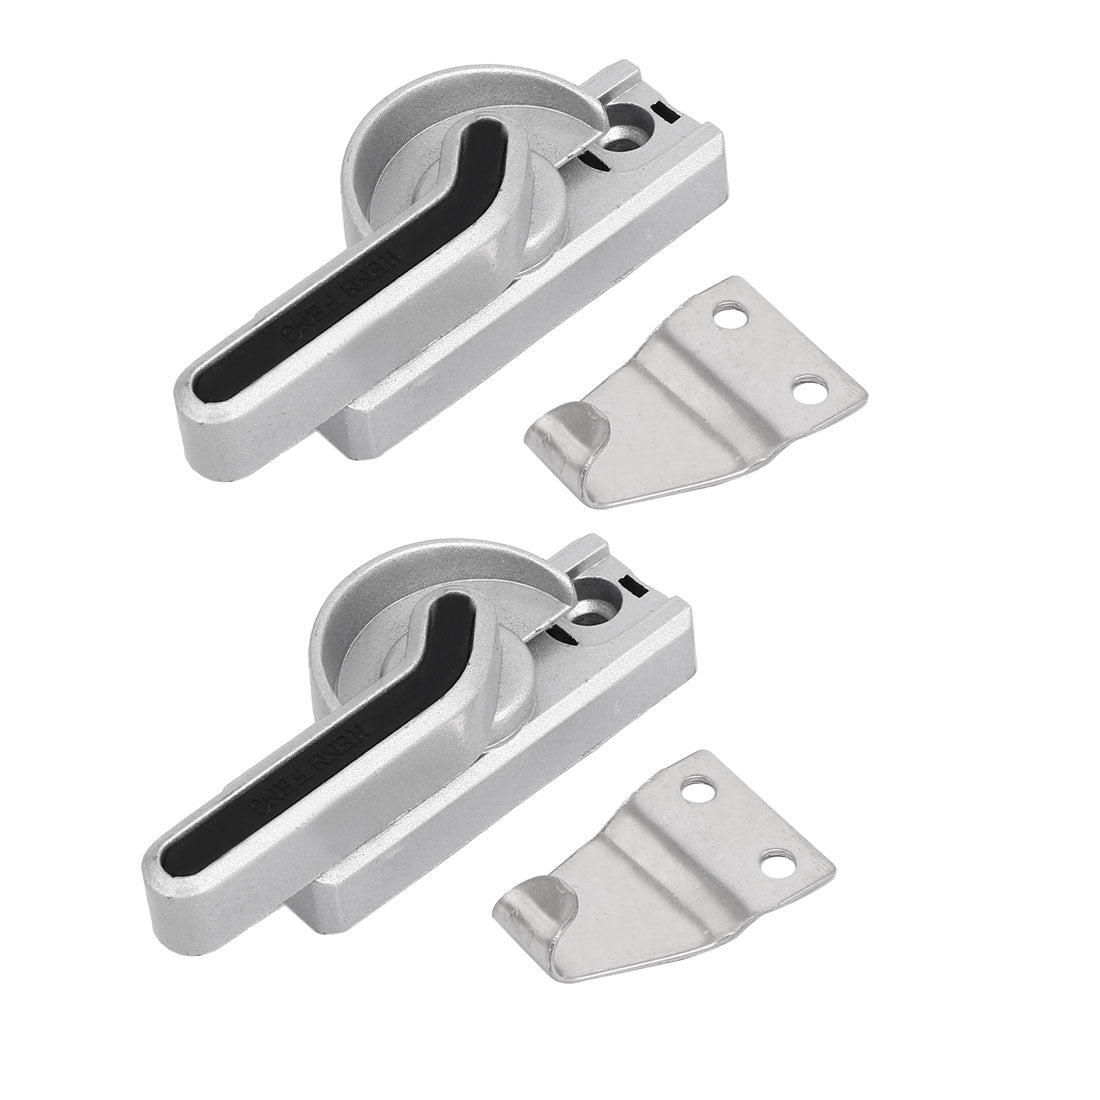 uxcell Uxcell 2pcs Zinc Alloy Cam Action Window Sash Lock Lfte Hand for Sliding Window